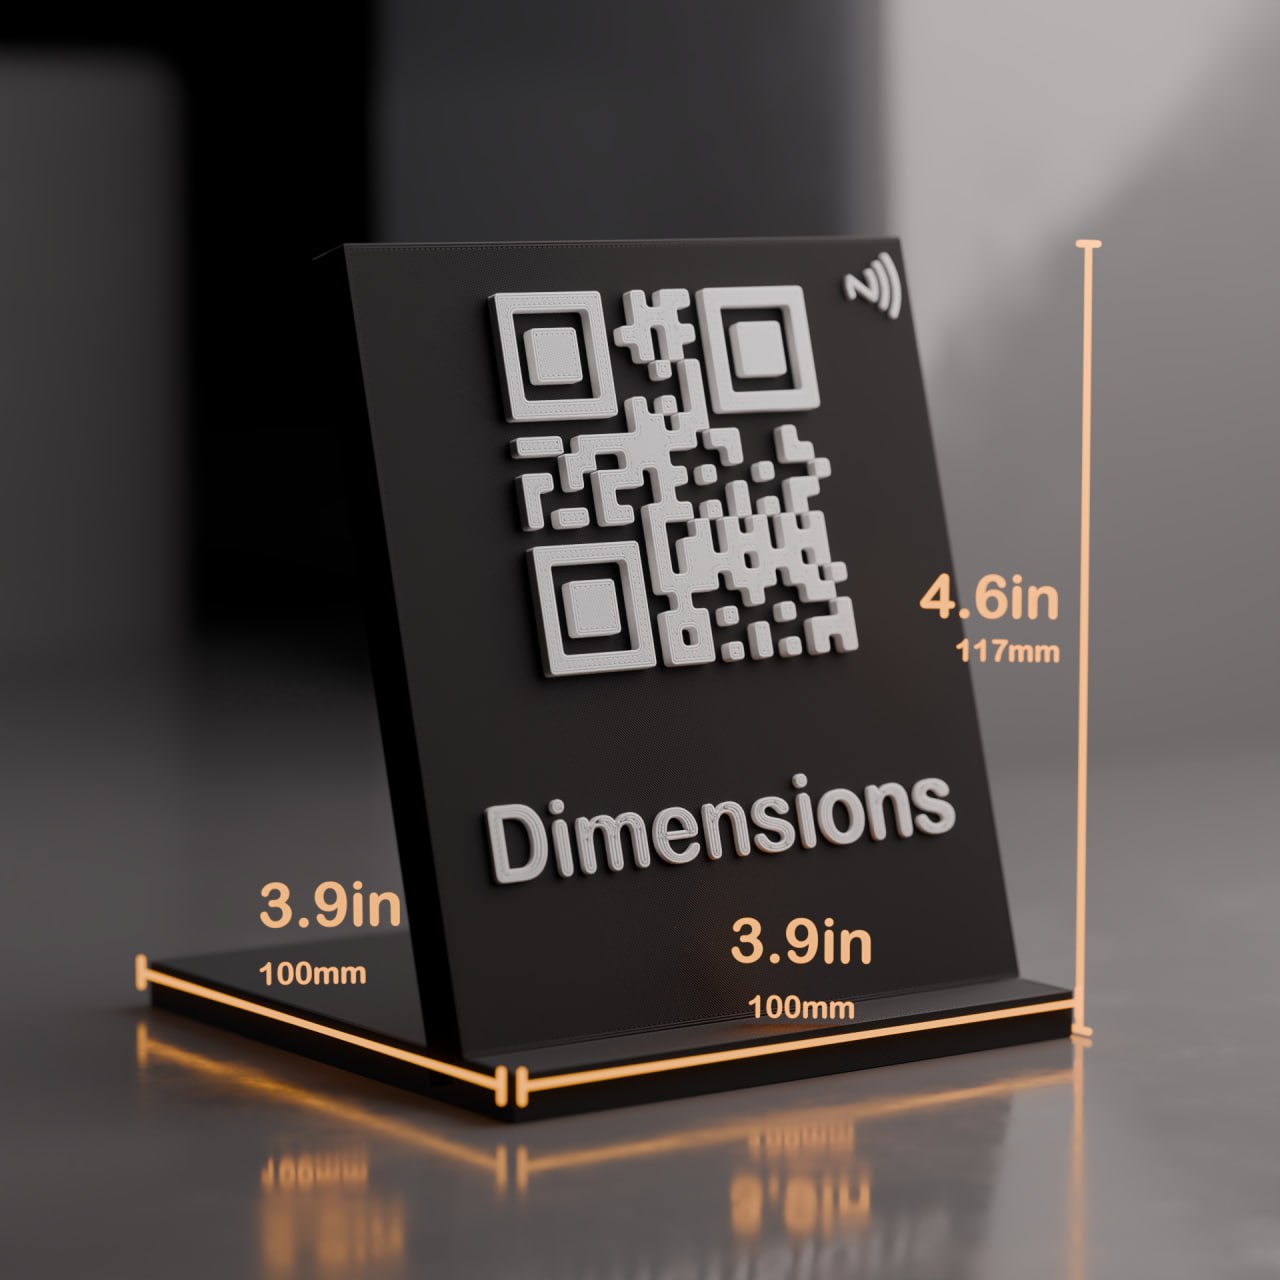 Dimensions of 4 Pack of Classic Qr Code Stands with NFC Chip - Get google reviews, boost website traffic, advertise social medias, and market your brand better.